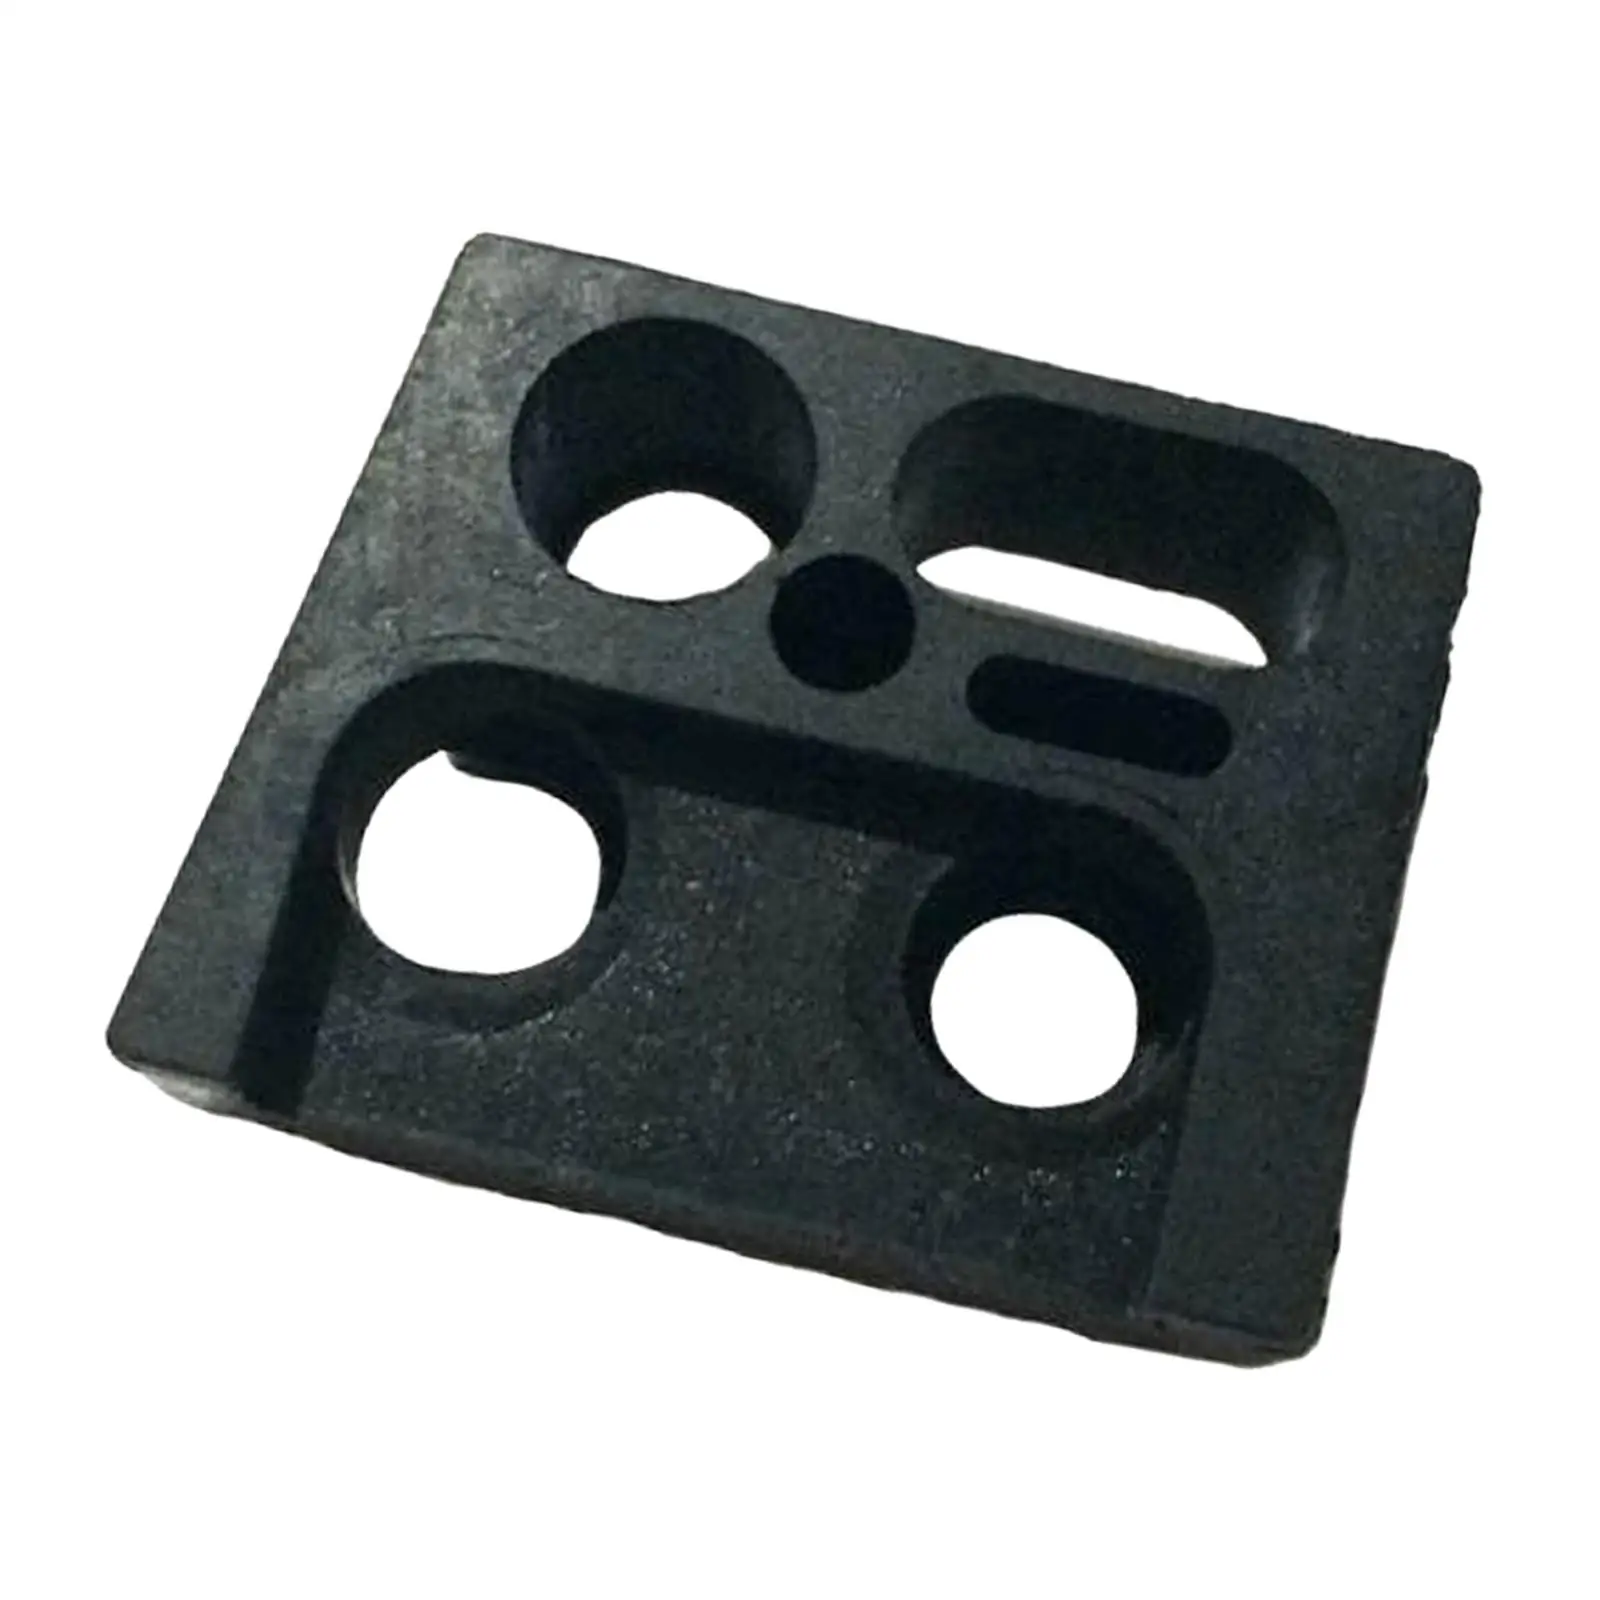 66T-42725-30 Direct Replaces Repair Parts Rubber Grommet Accessory Easy to Install for Powertec Outboard Engine 40HP